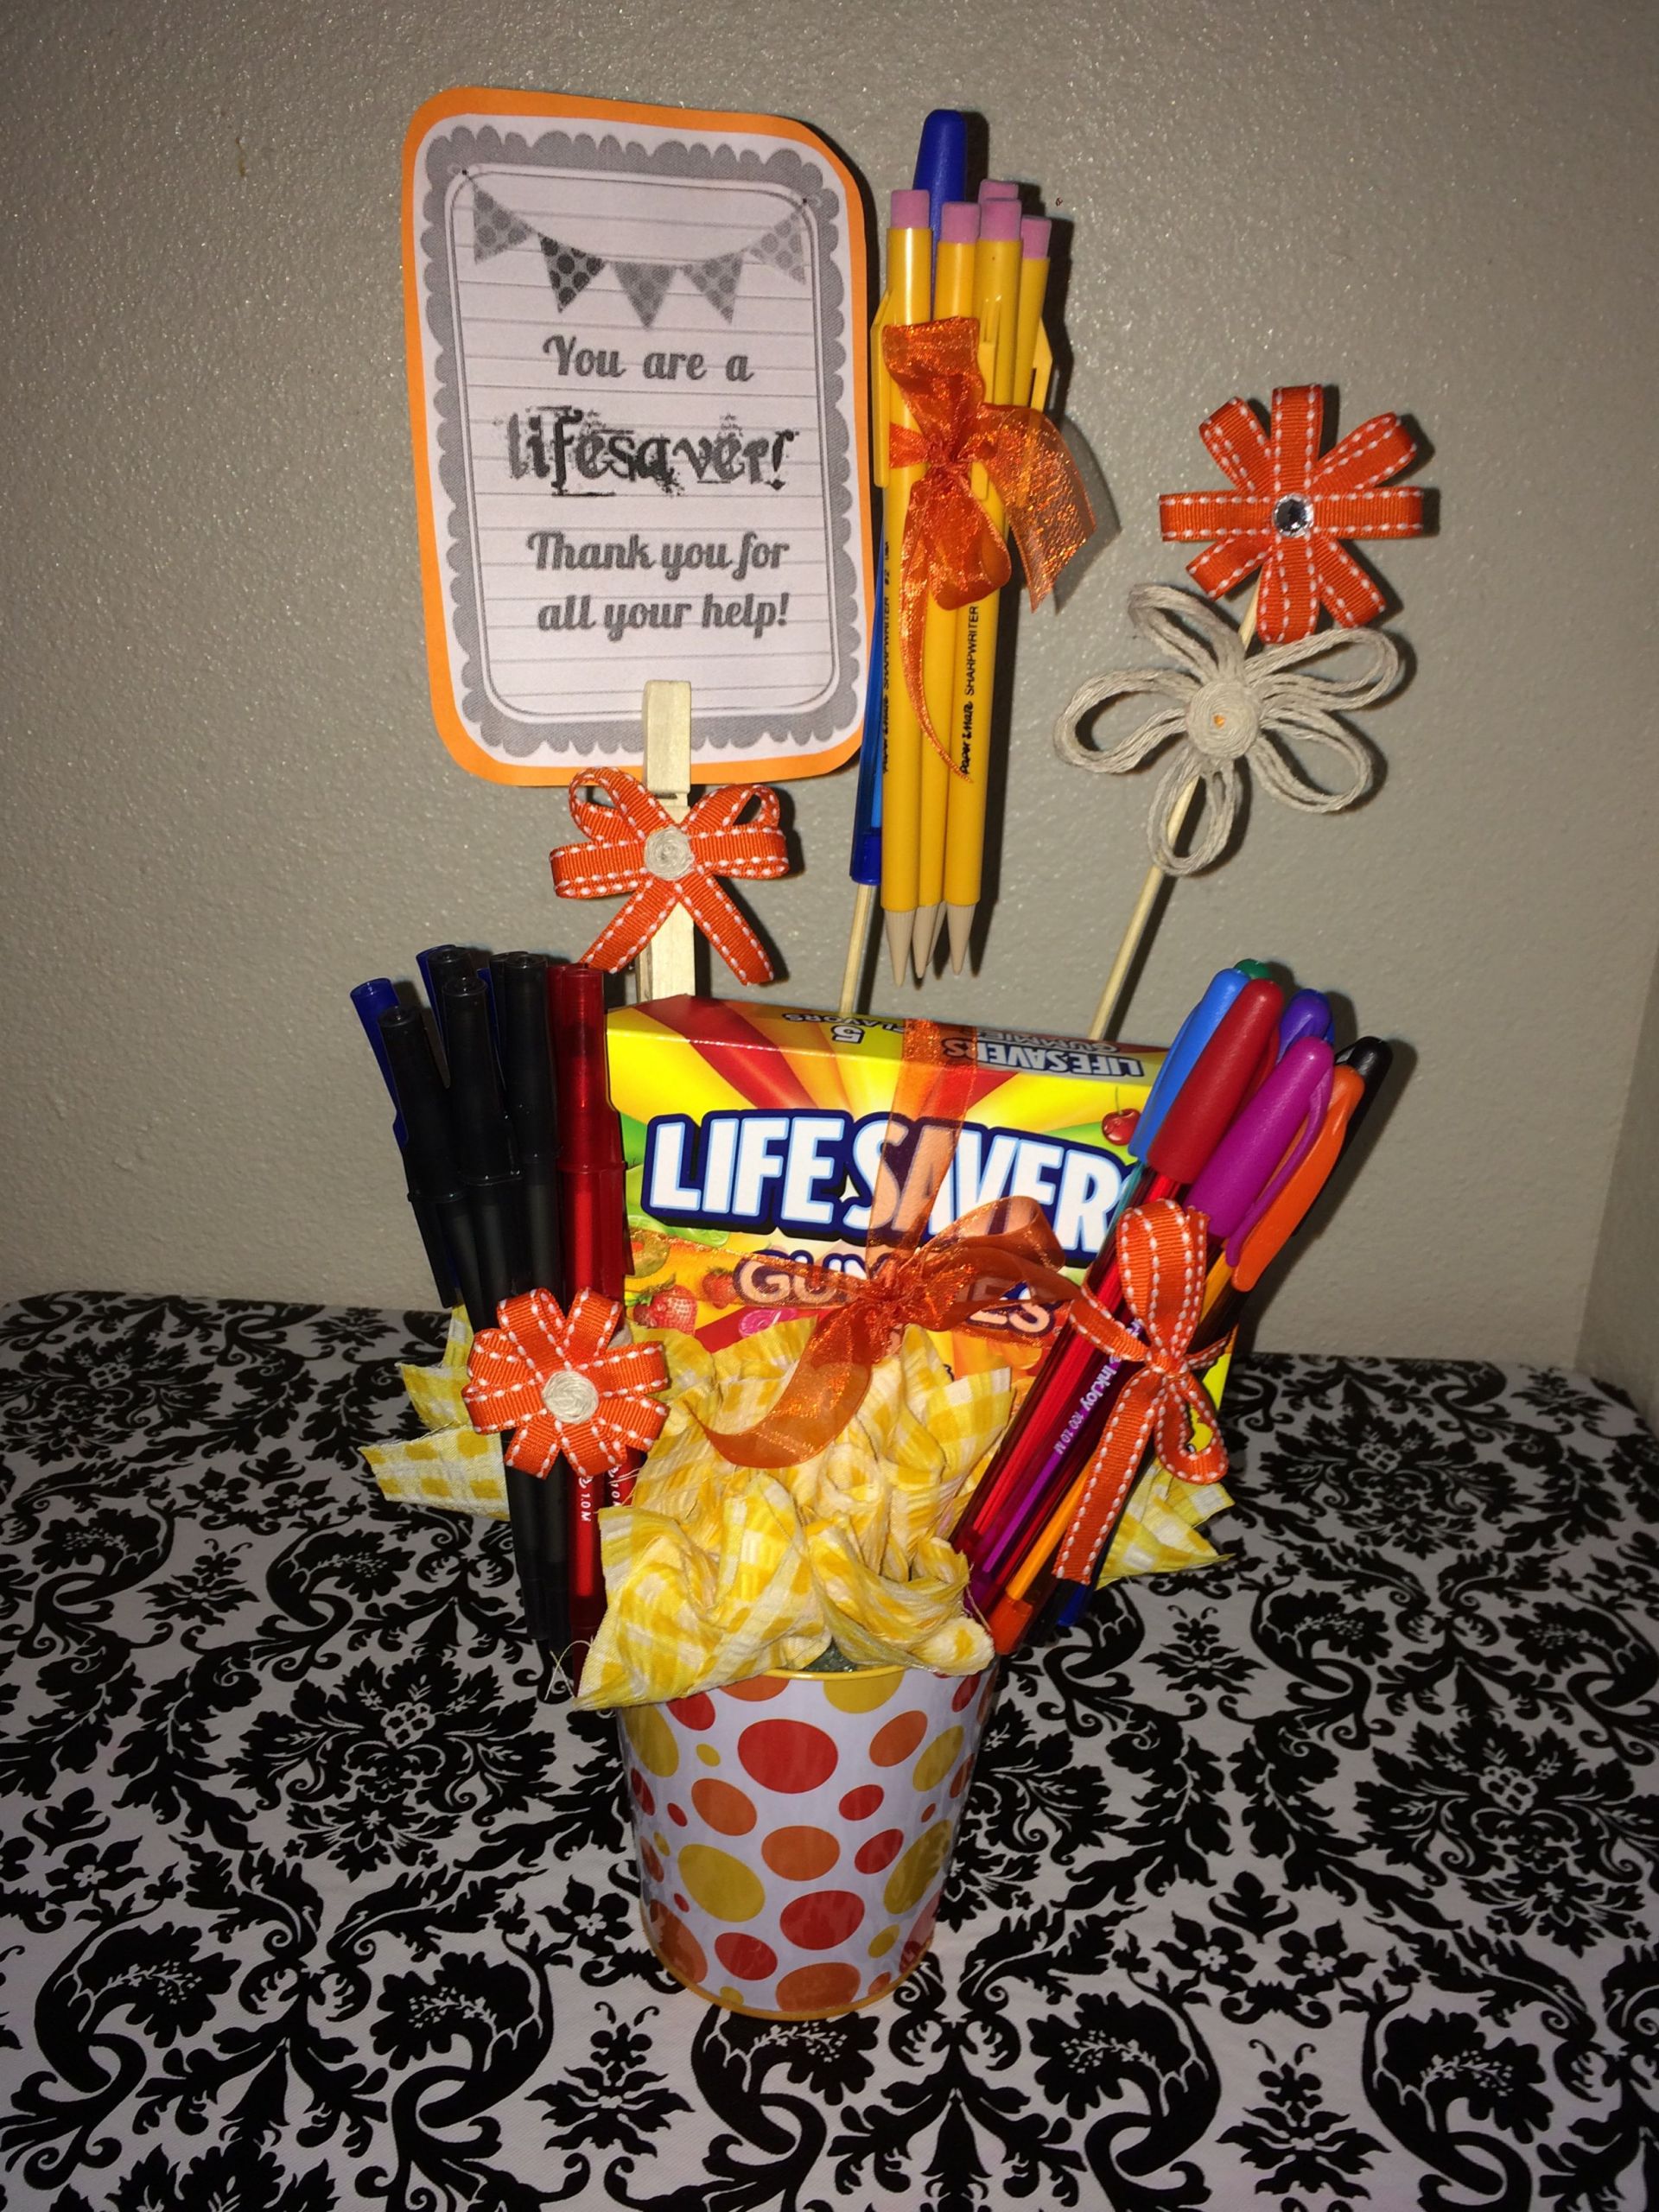 Professional Thank You Gift Ideas
 Gift for a Secretary or volunteer moms at your school